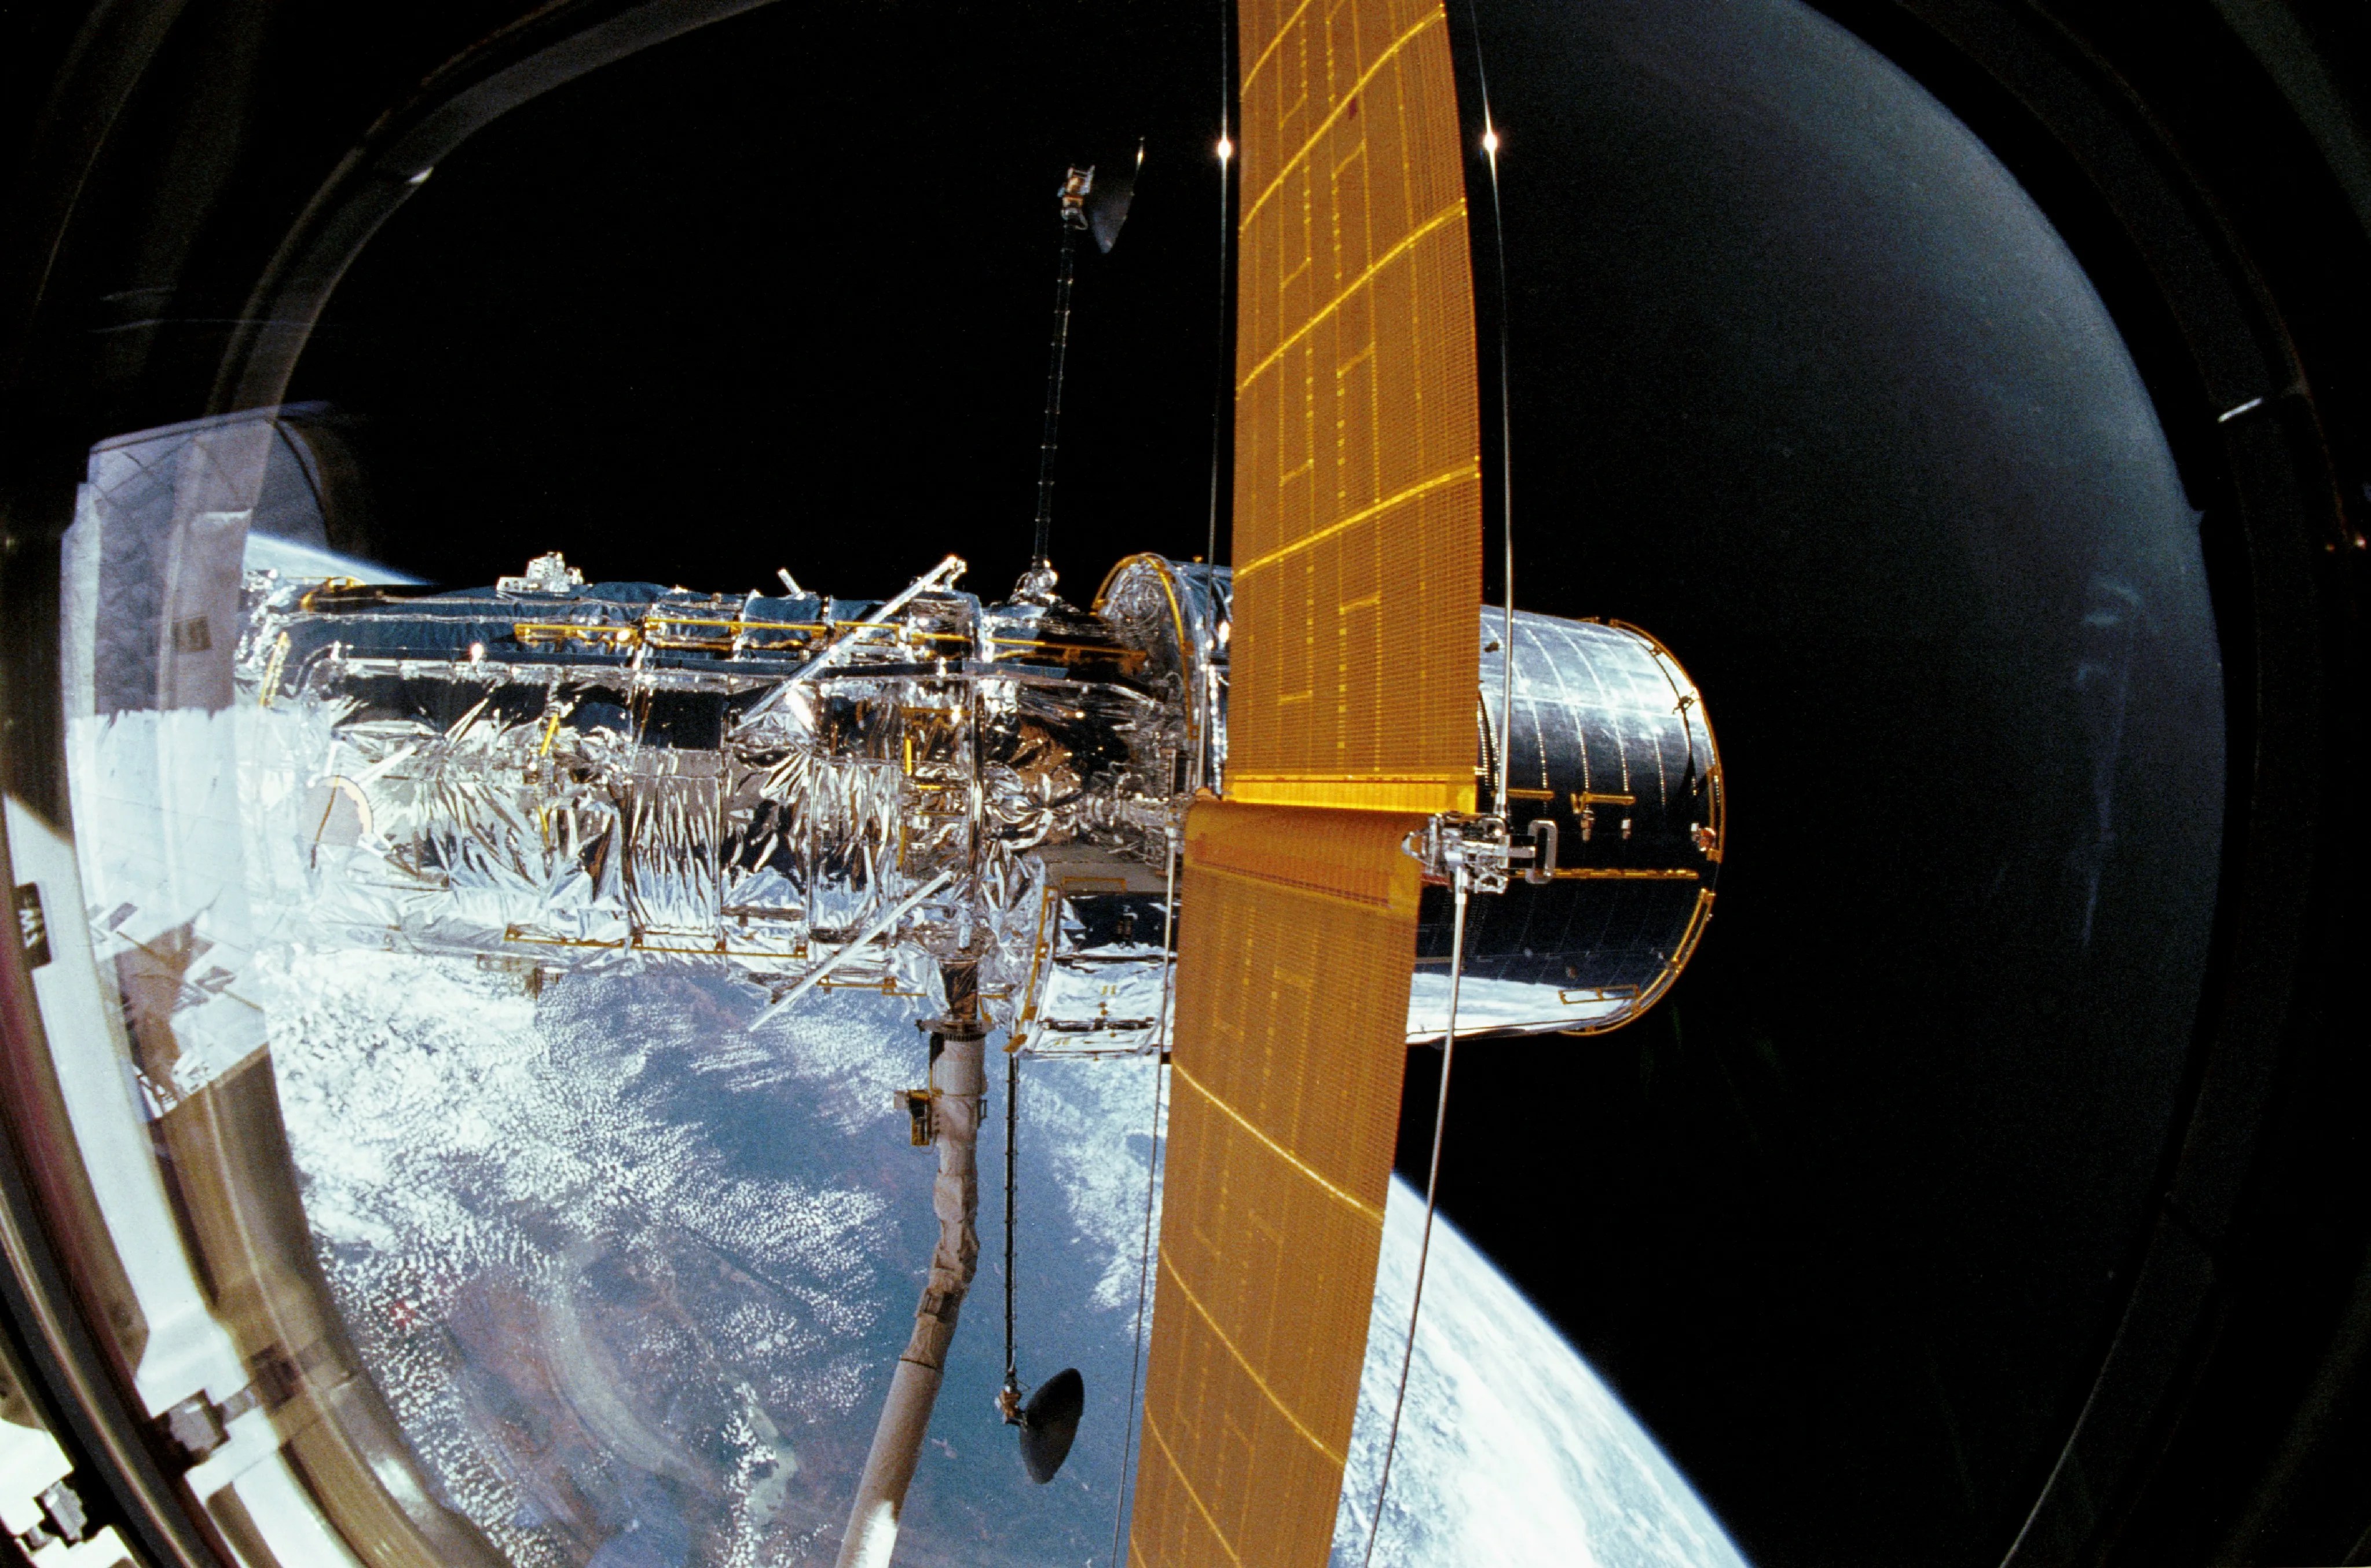 Da Hubble Telescope up in space gripped by tha space shuttle's robotic arm.